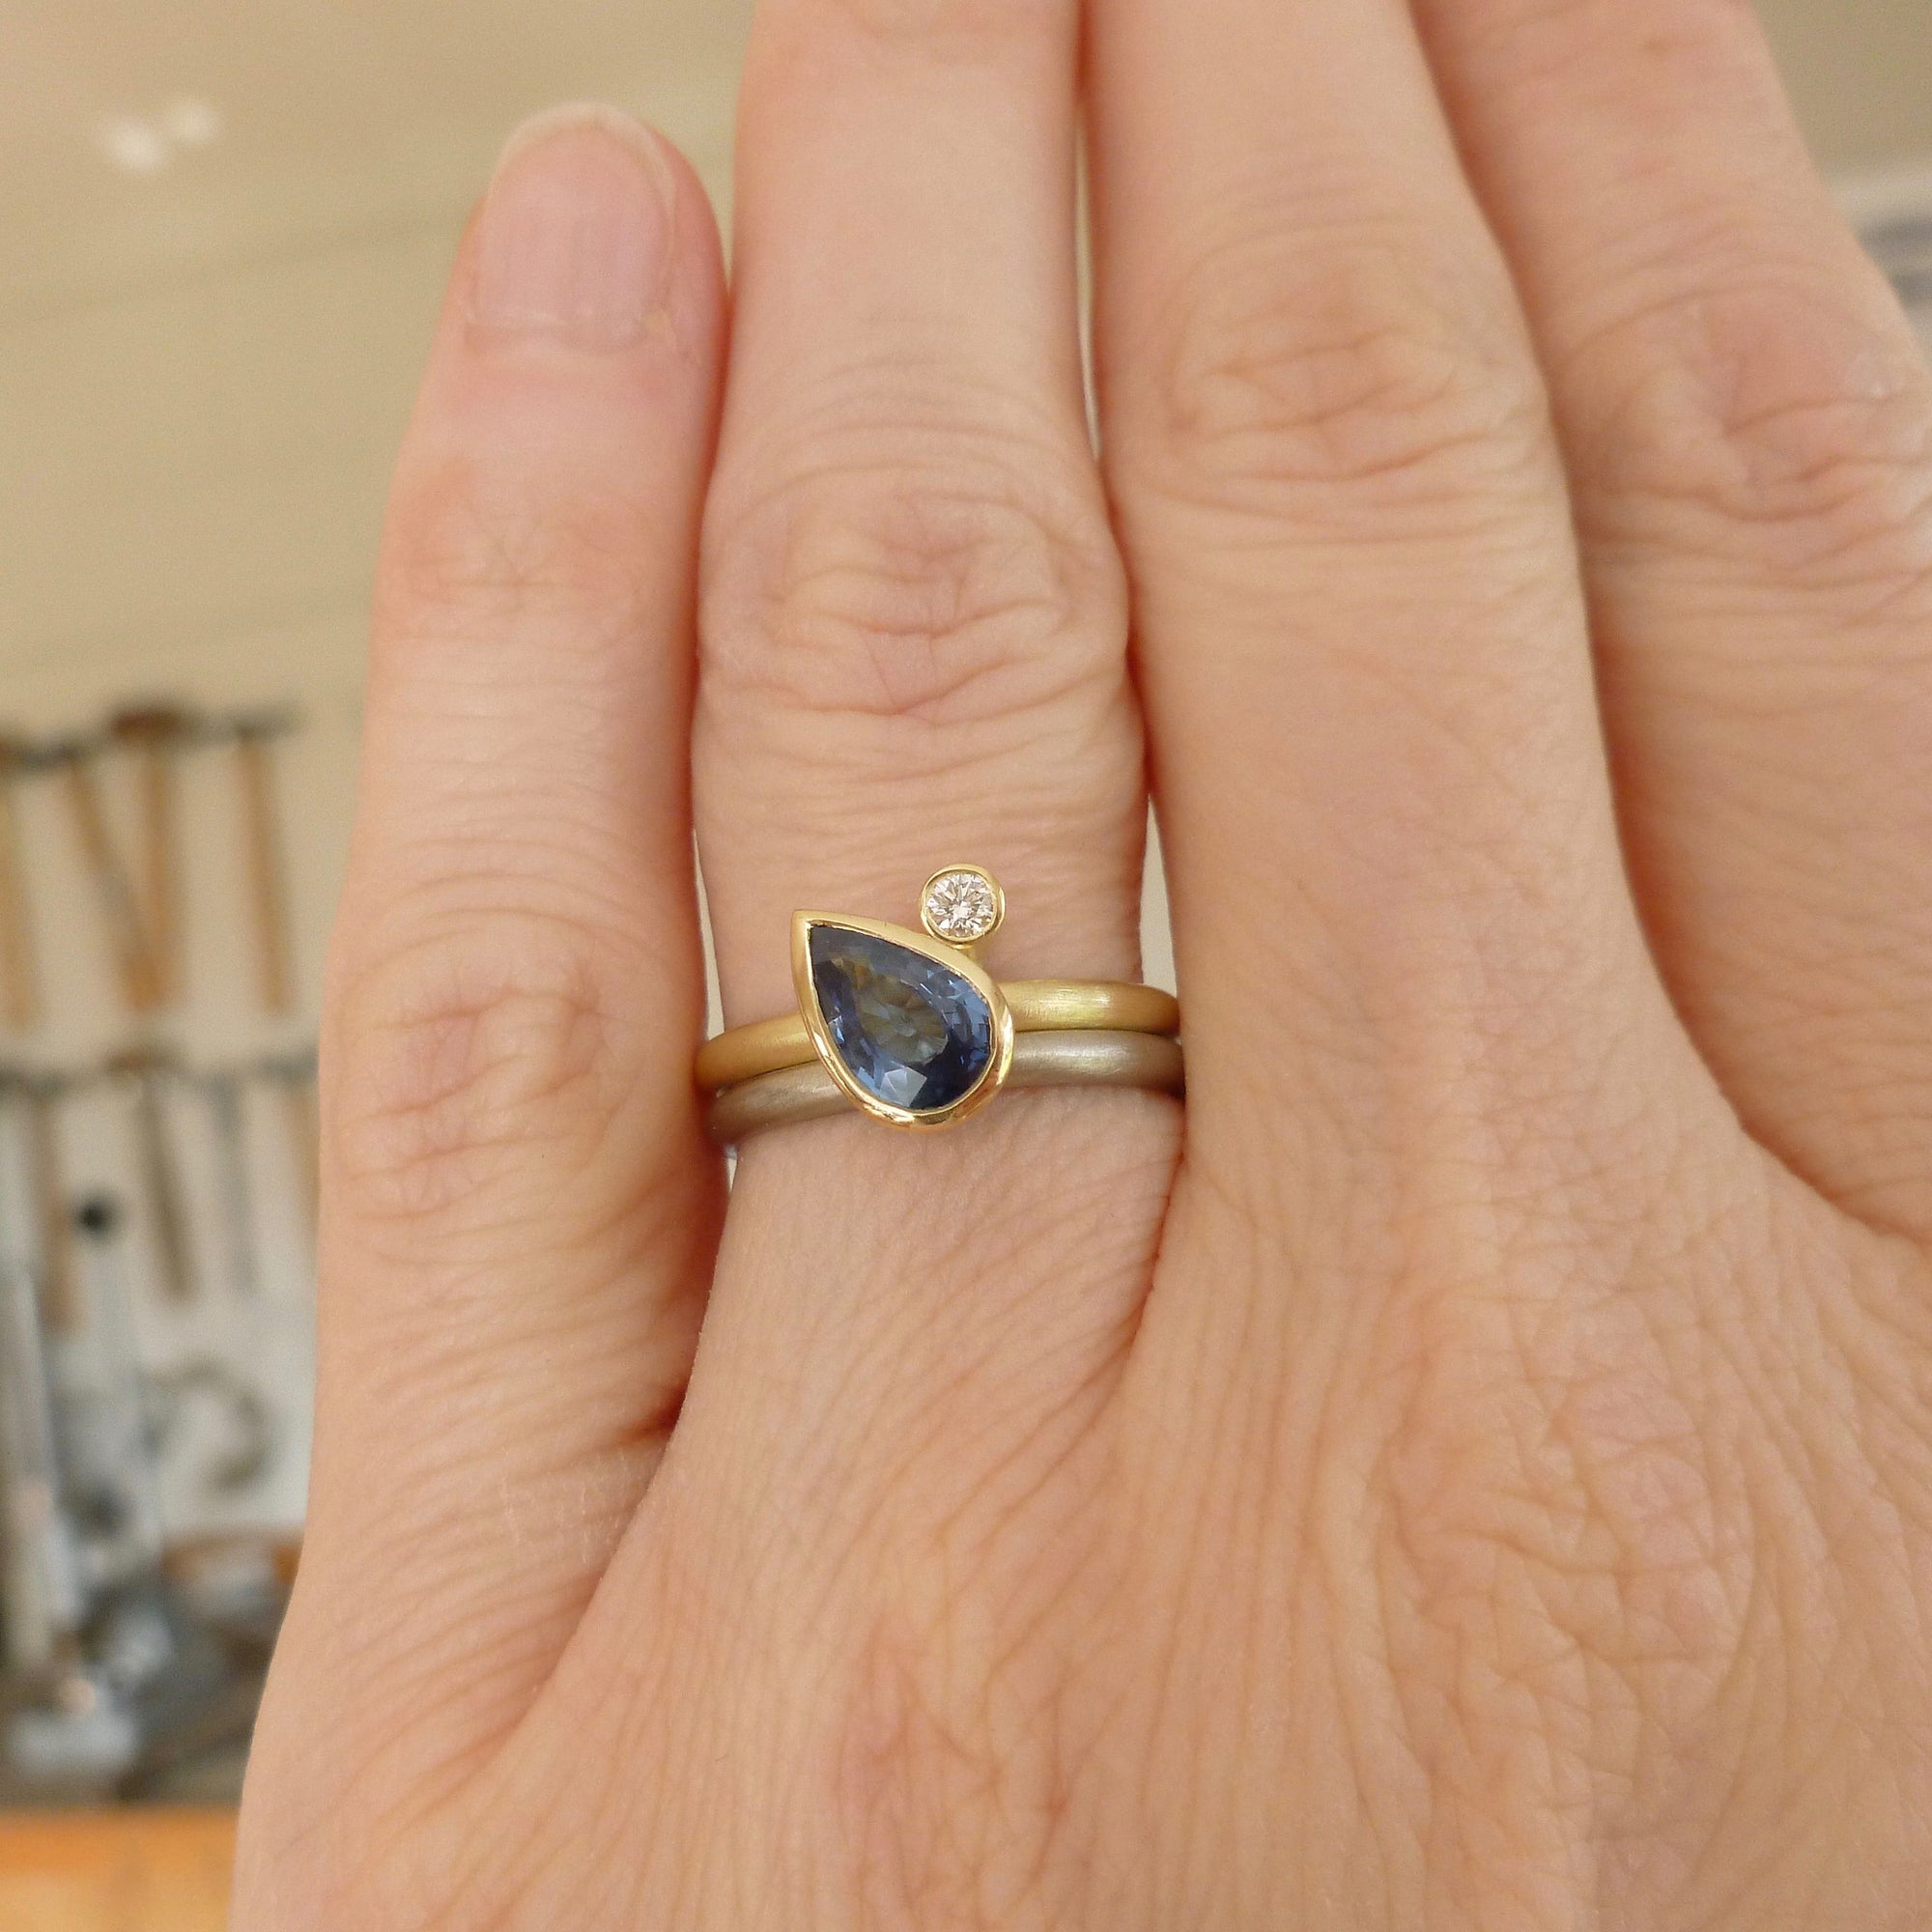 Modern unusual blue sapphire stacking ringset by Sue Lane and handmade in Herefordshire   Multi band ring or interlocking ring, sometimes called double band ring too.